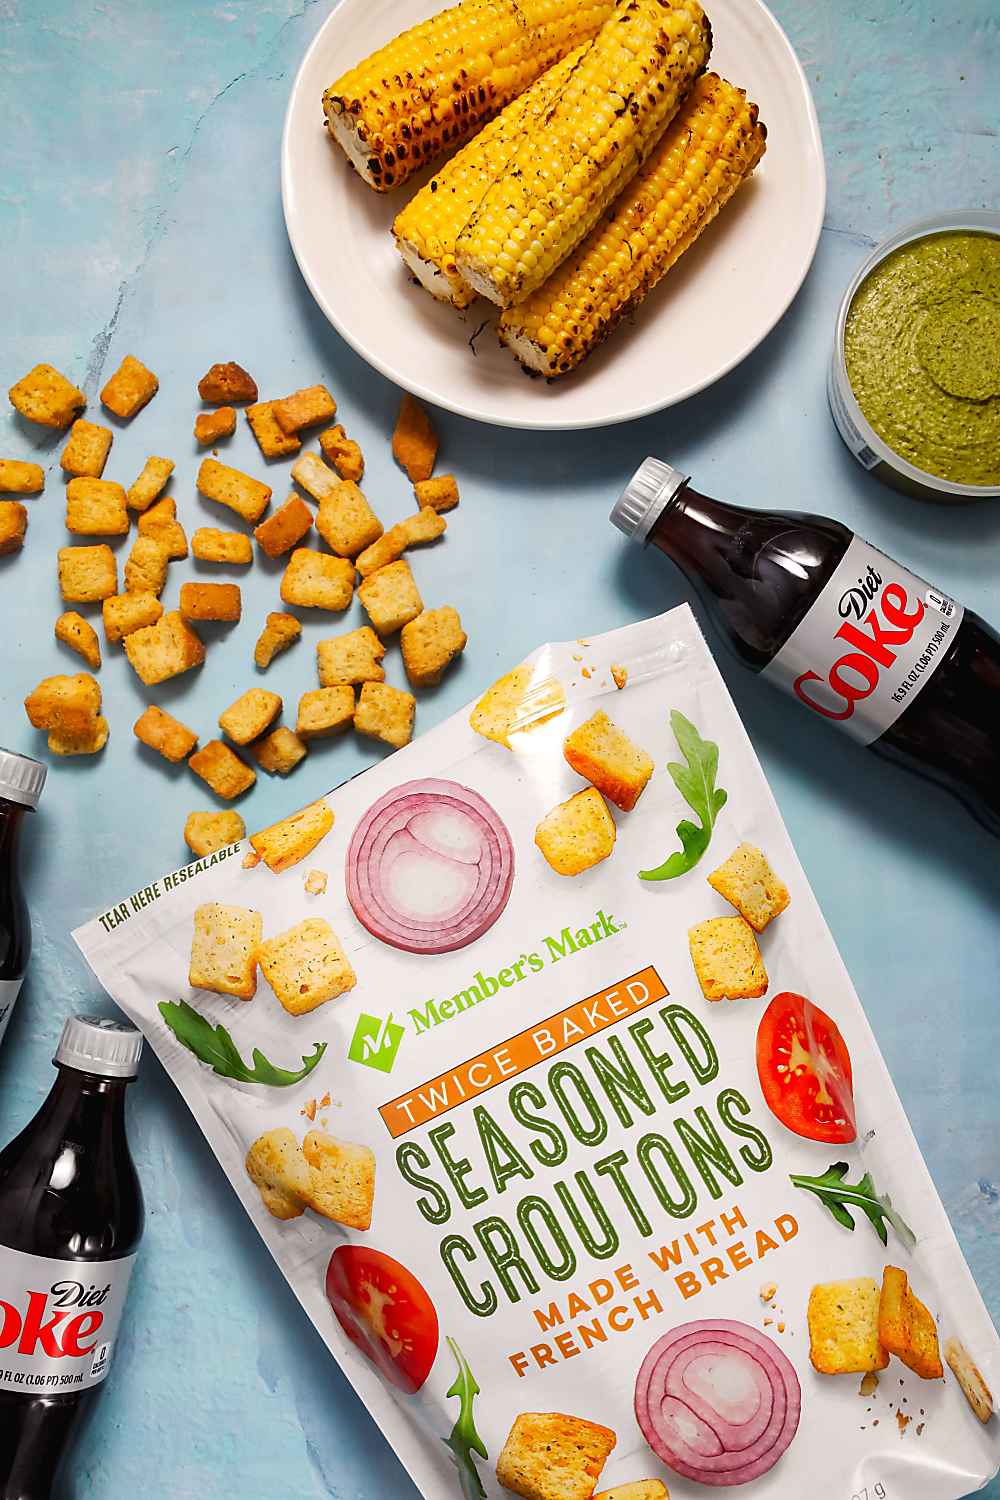 Croutons and Diet Coke